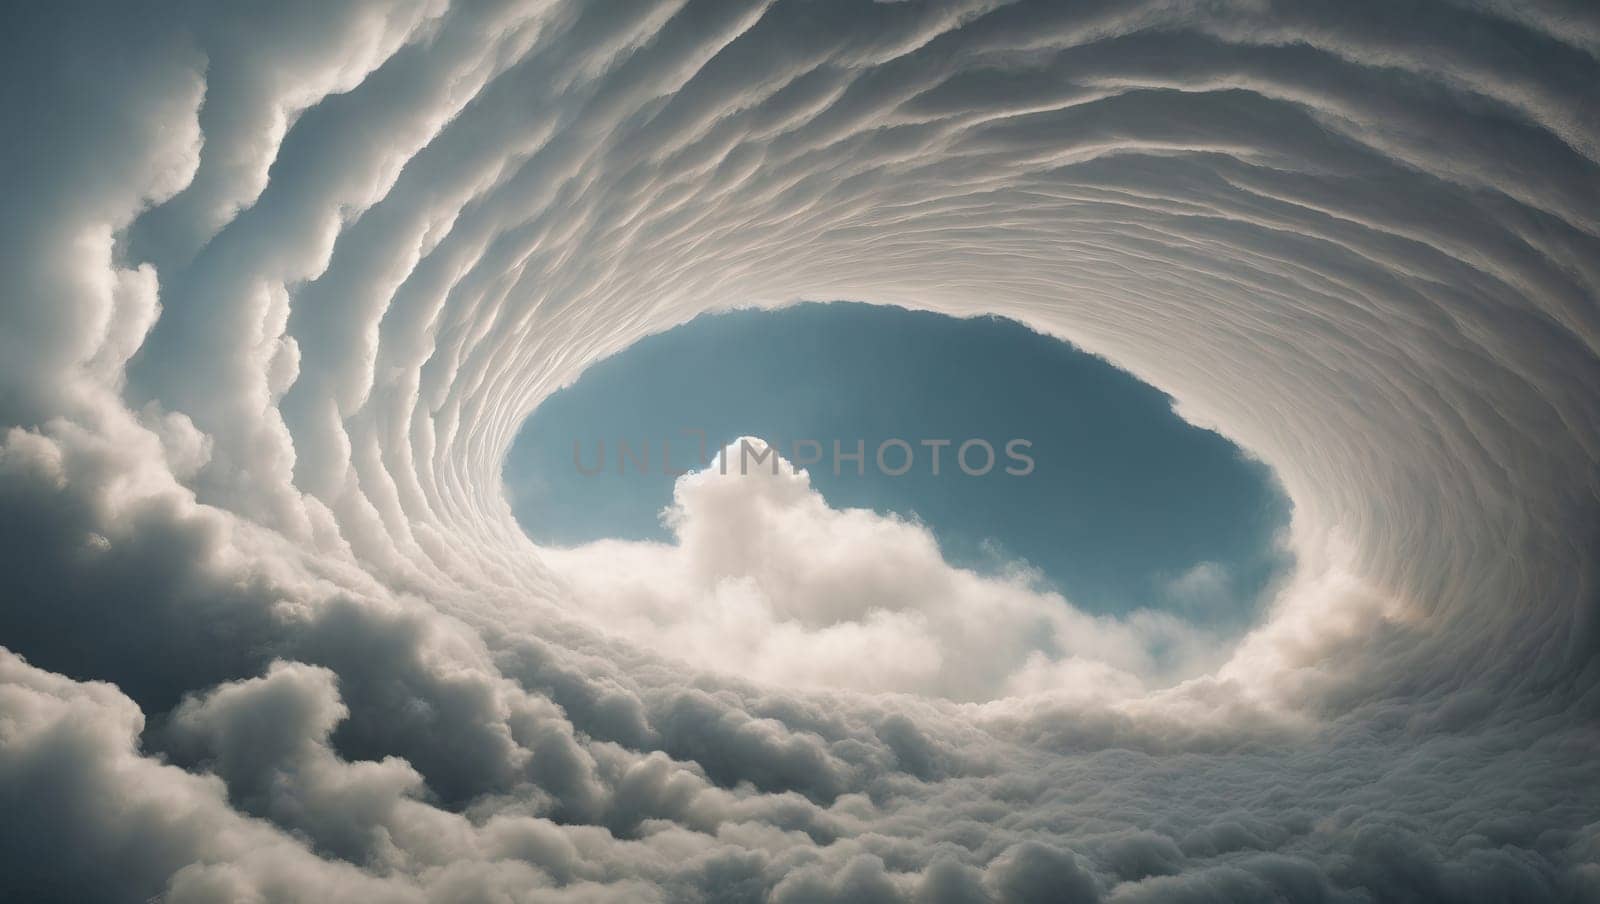 Inside a excessively long spiral tunnel of clouds by applesstock